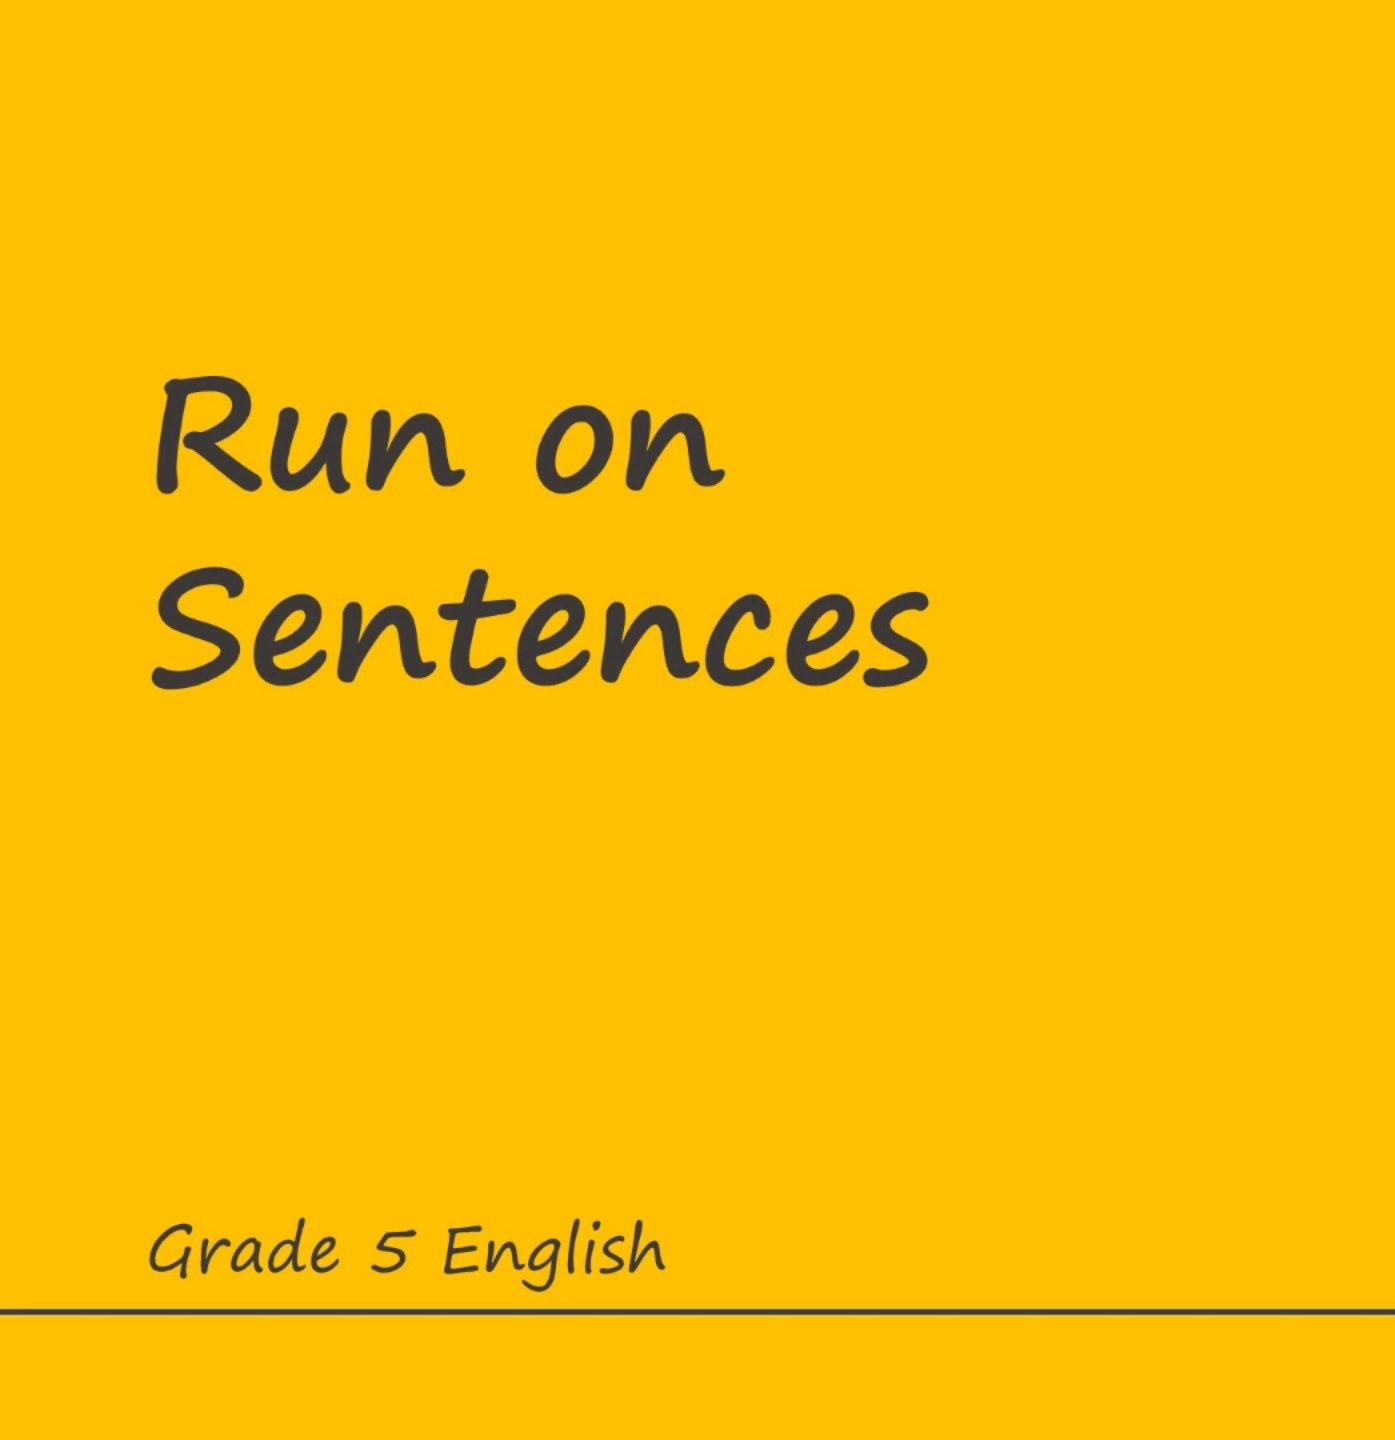 Run-on Sentences and How to Fix Them